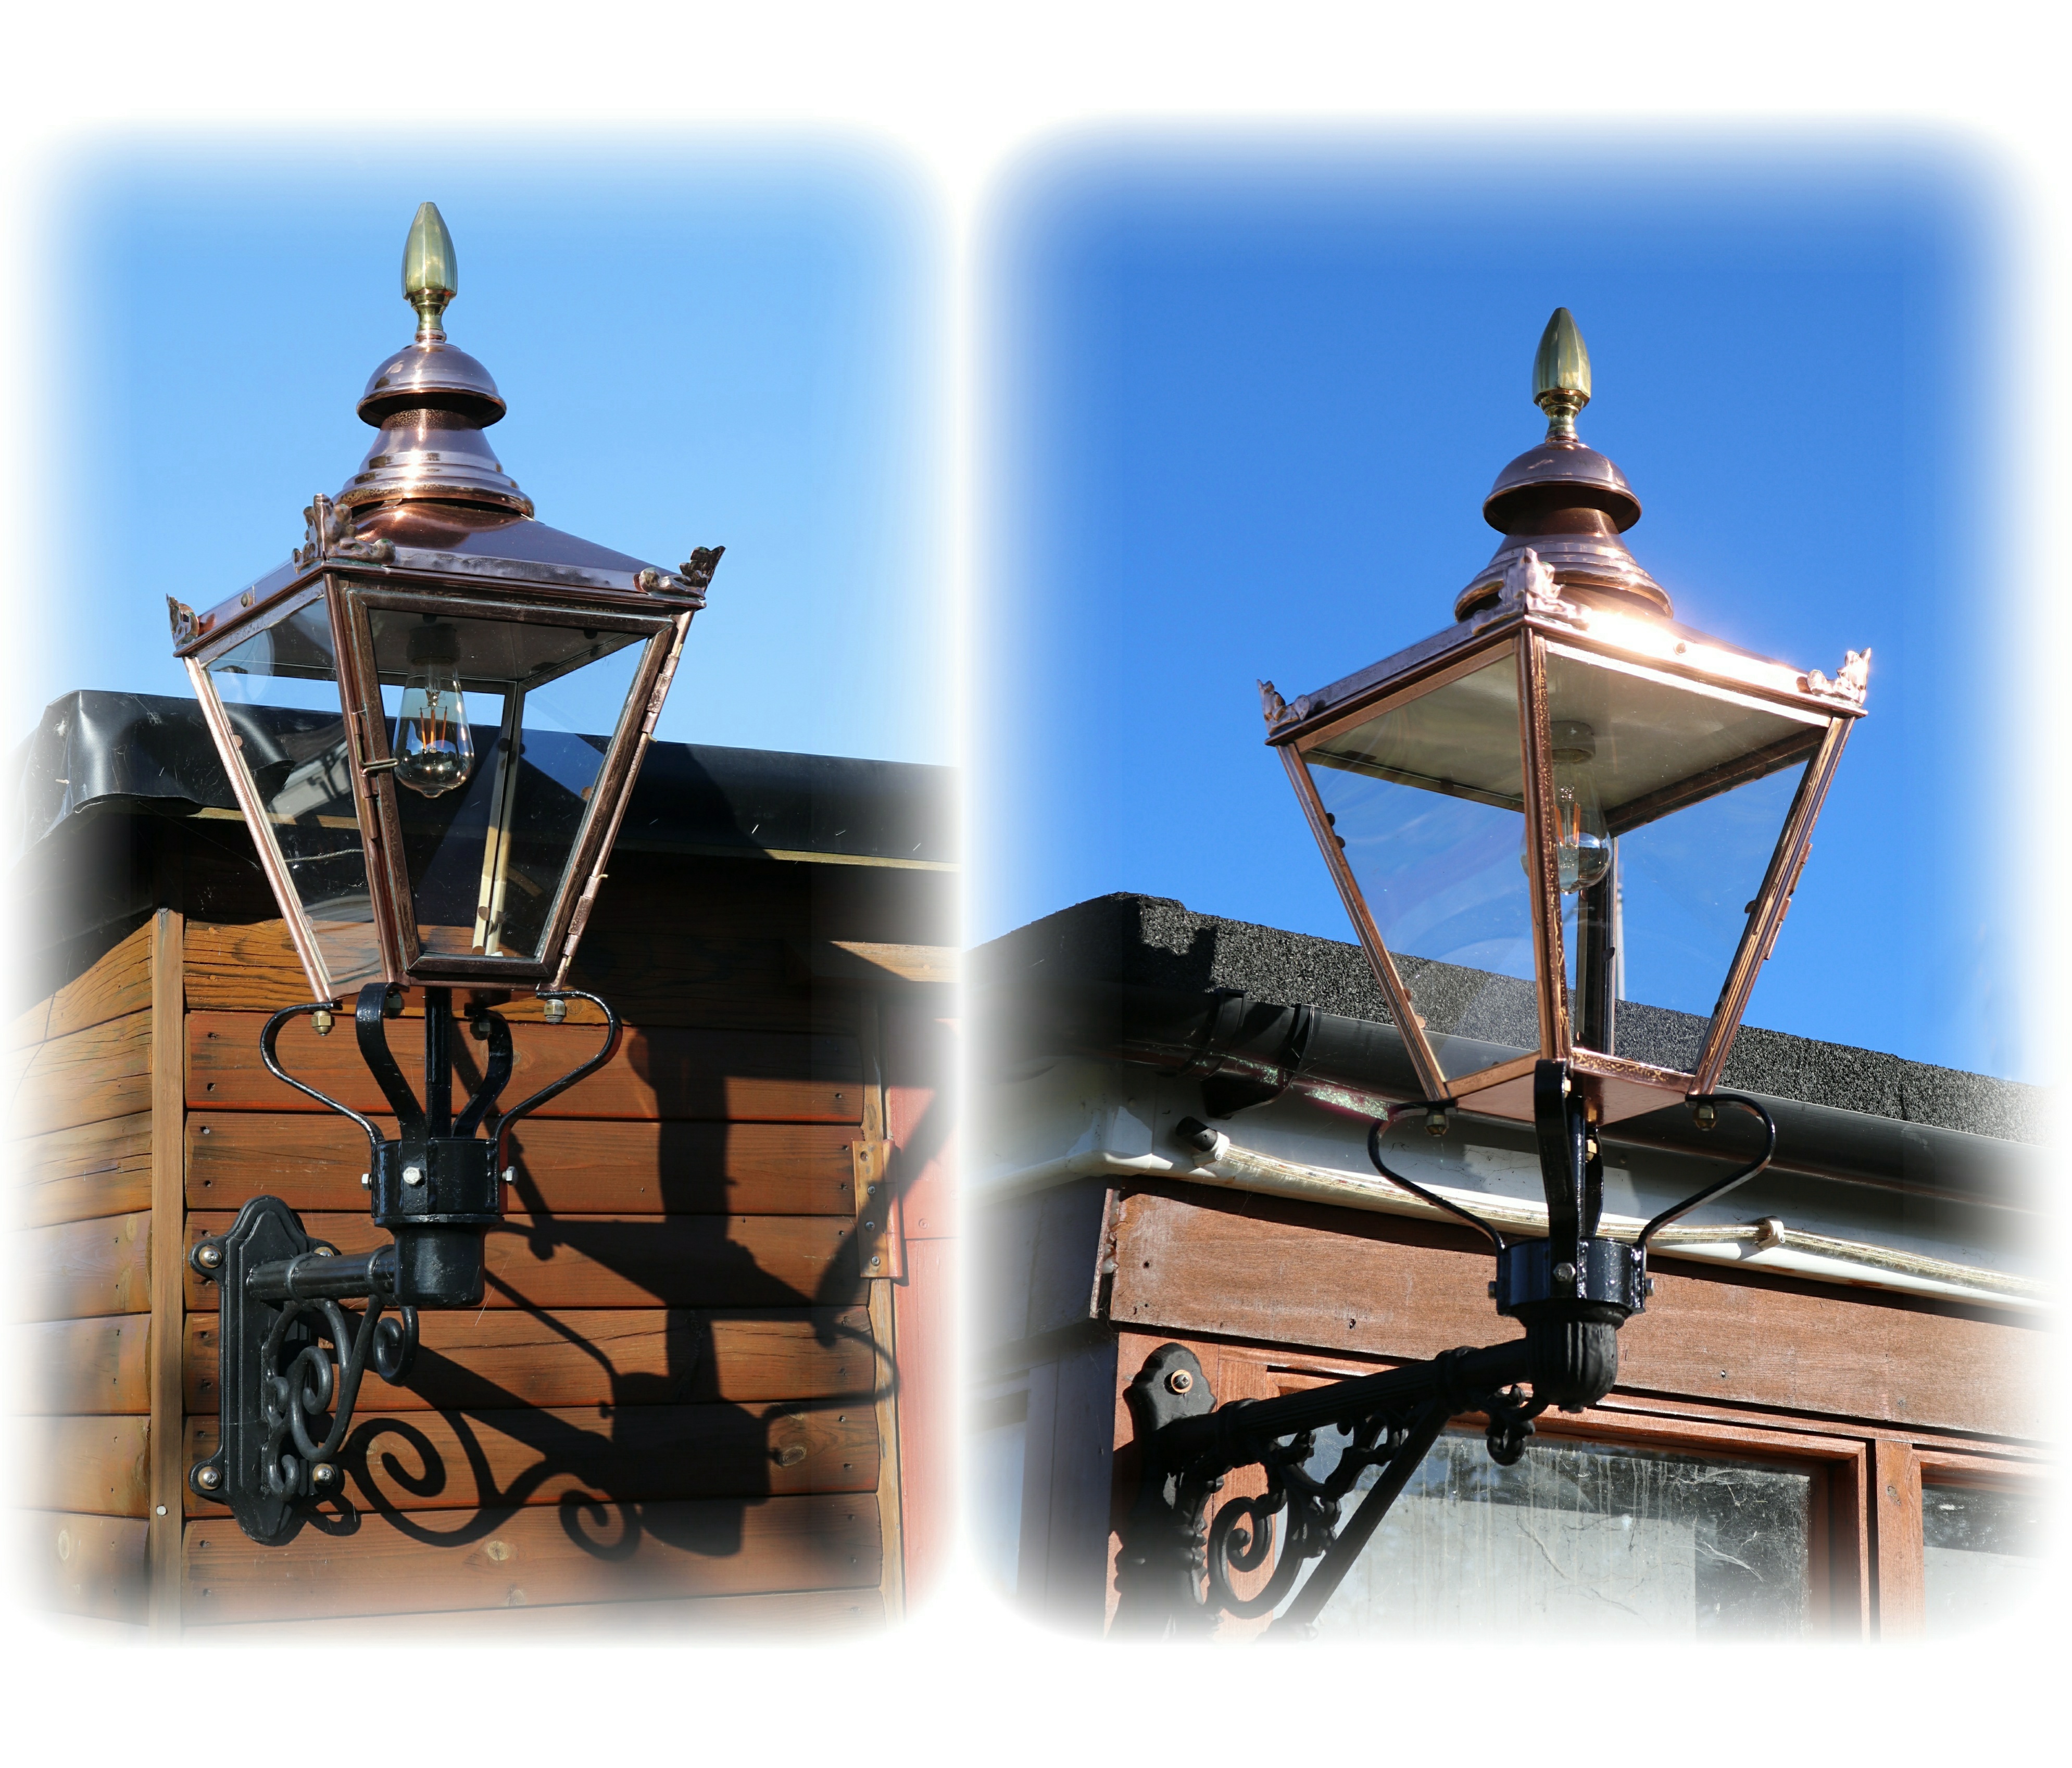 A pair of Victorian street lamps restored